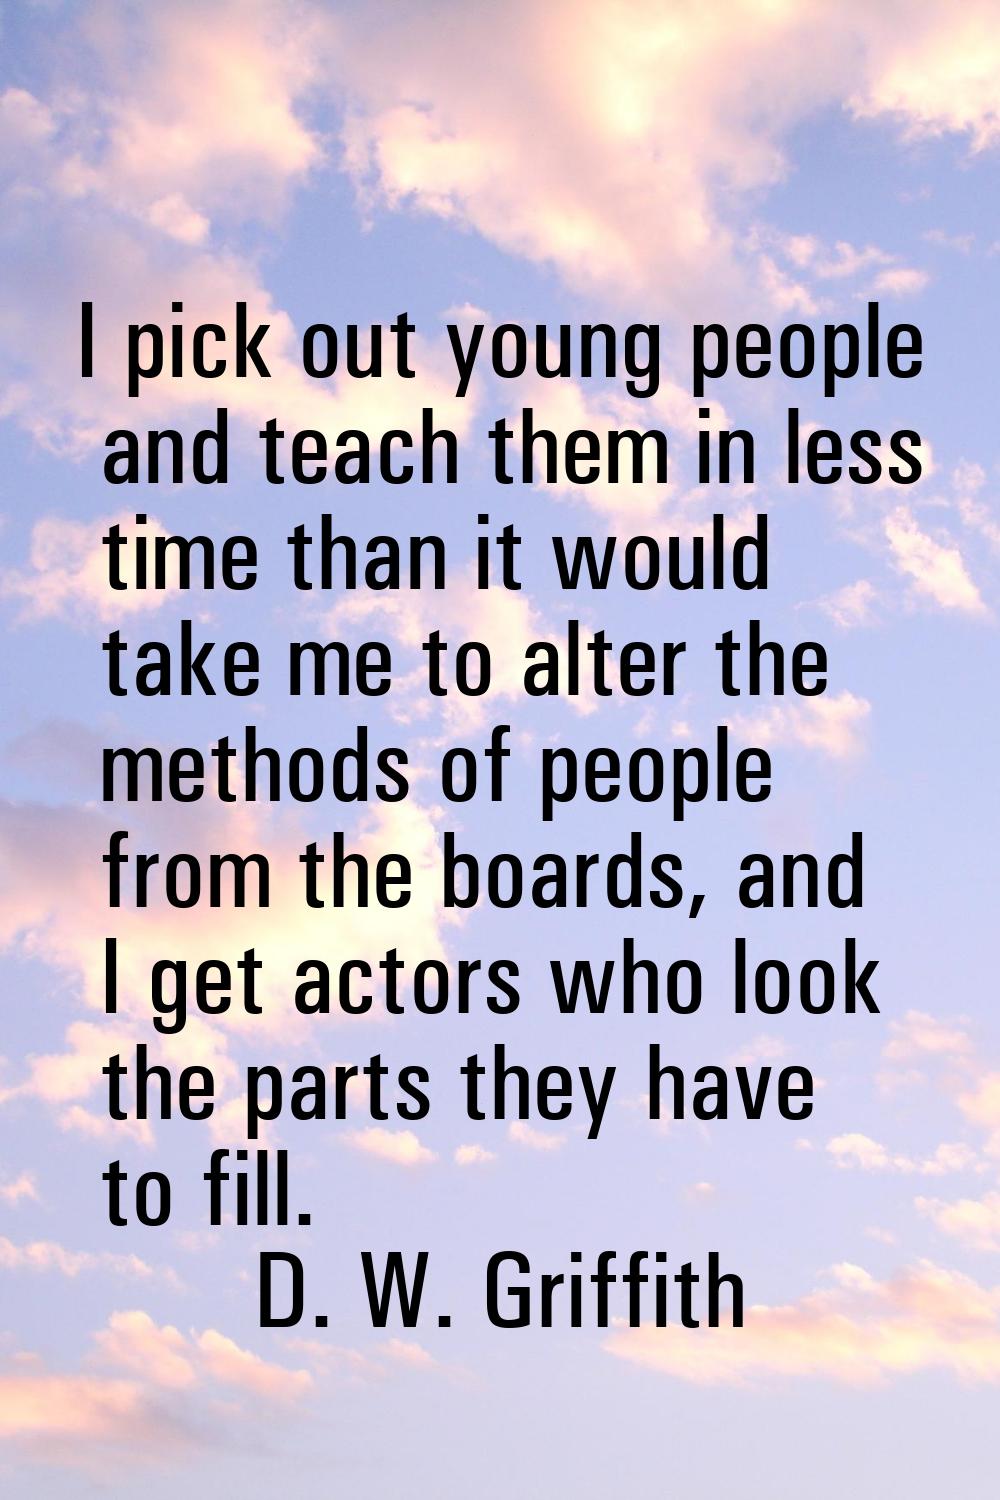 I pick out young people and teach them in less time than it would take me to alter the methods of p